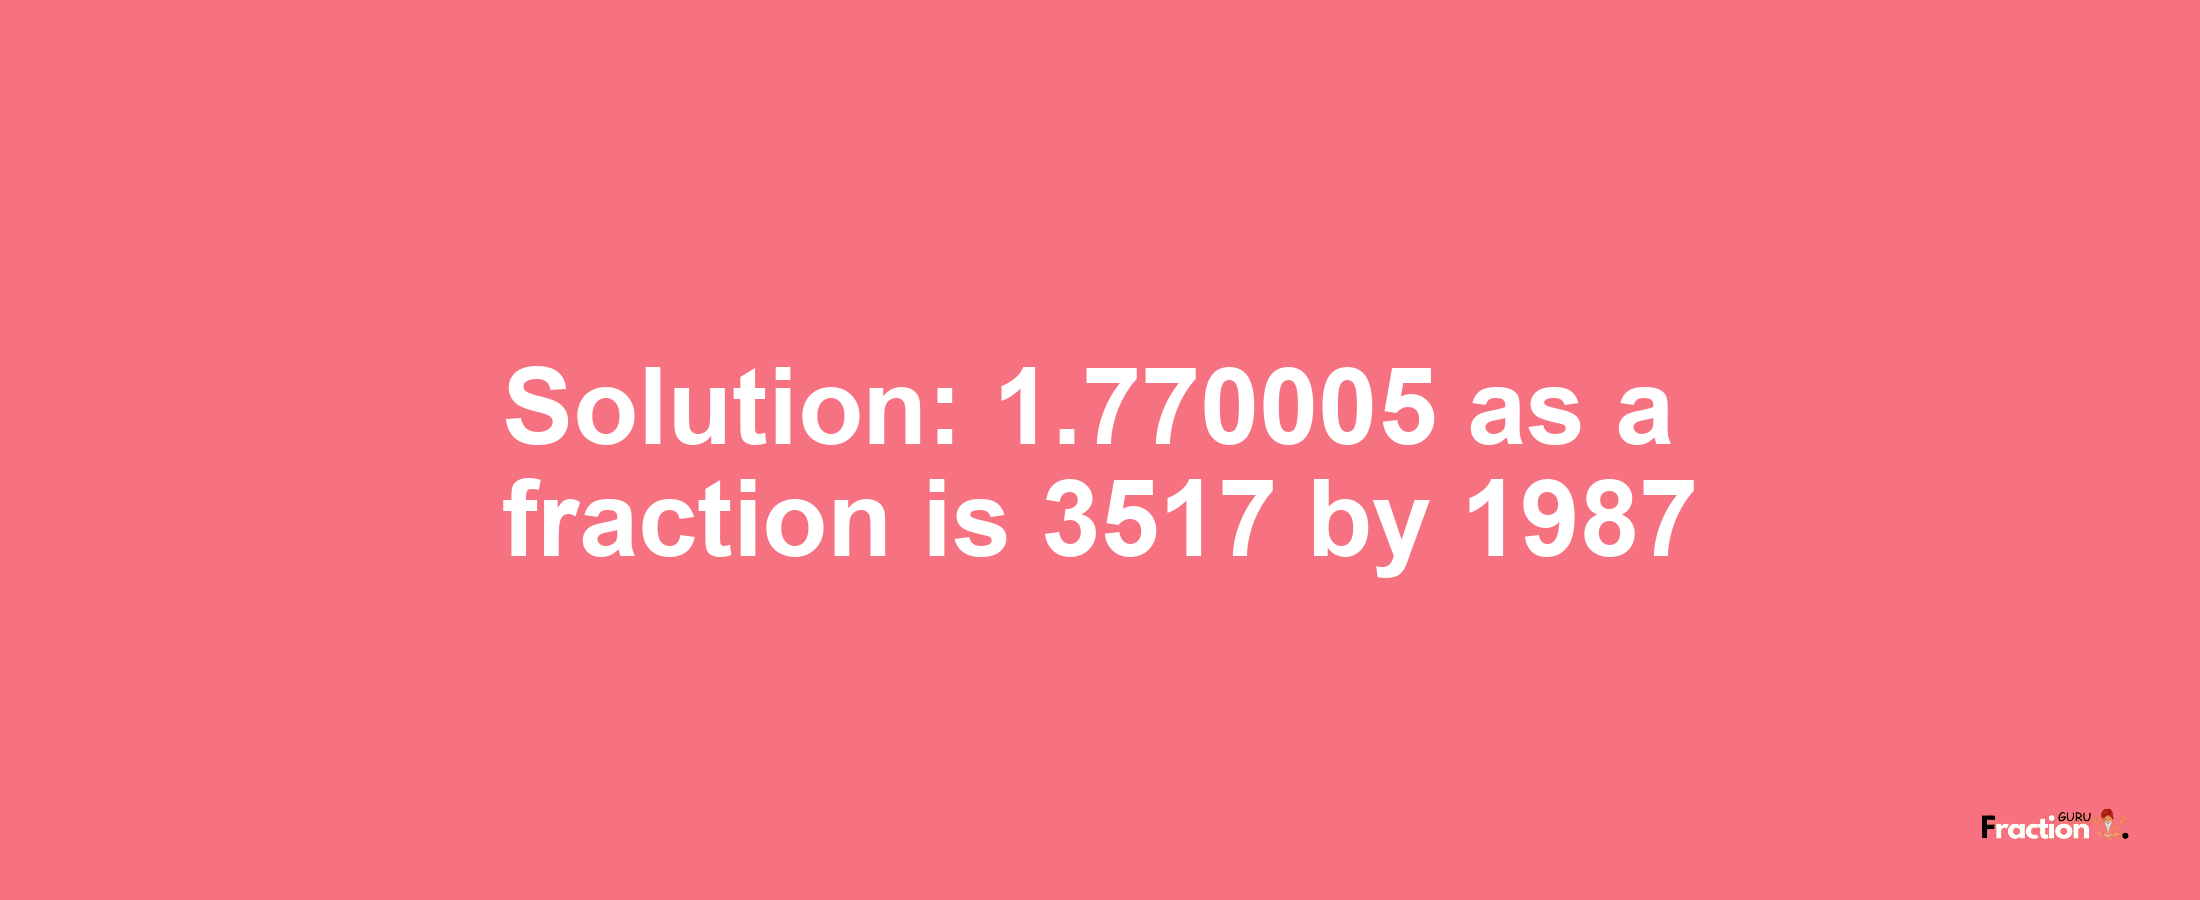 Solution:1.770005 as a fraction is 3517/1987